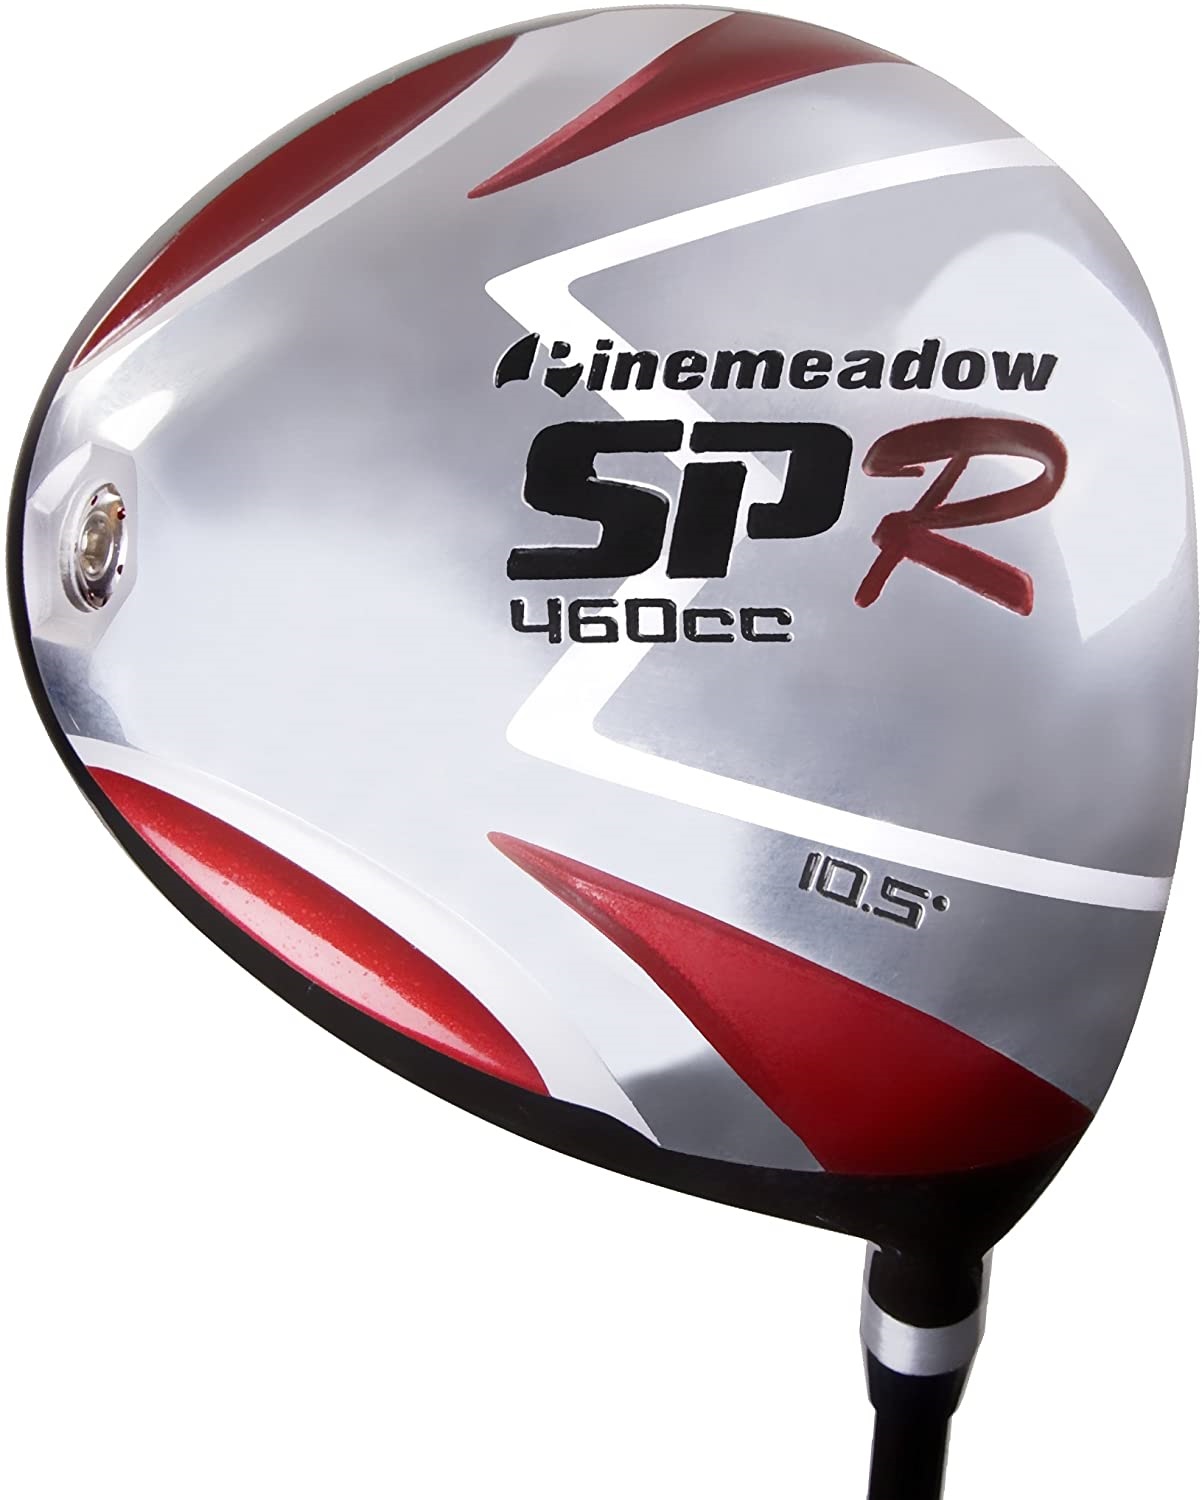 Pinemeadow SPR Driver